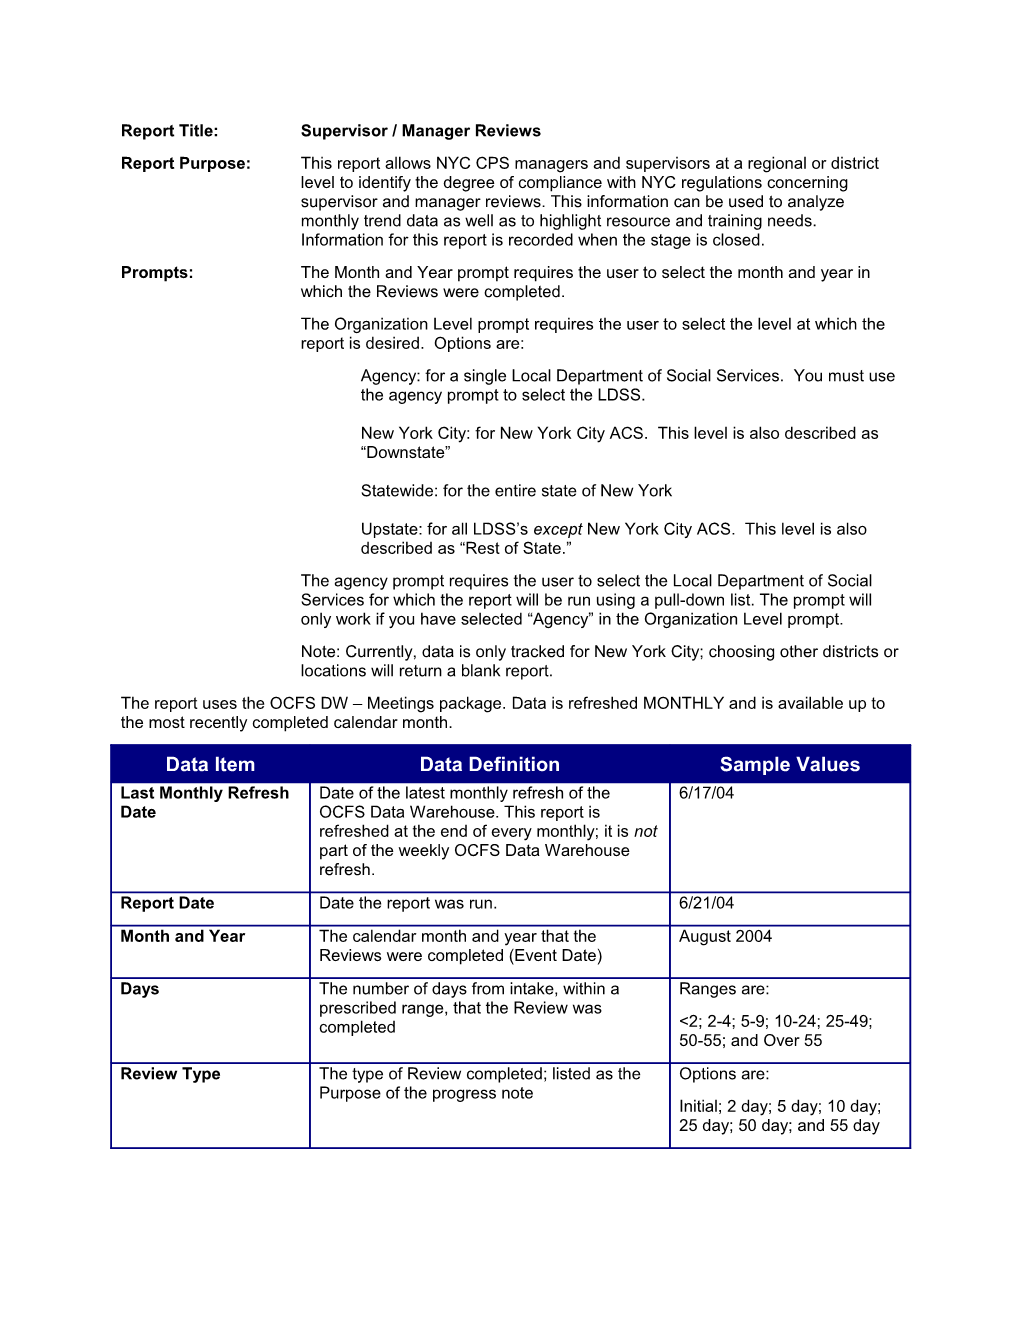 Report Title:Supervisor / Manager Reviews